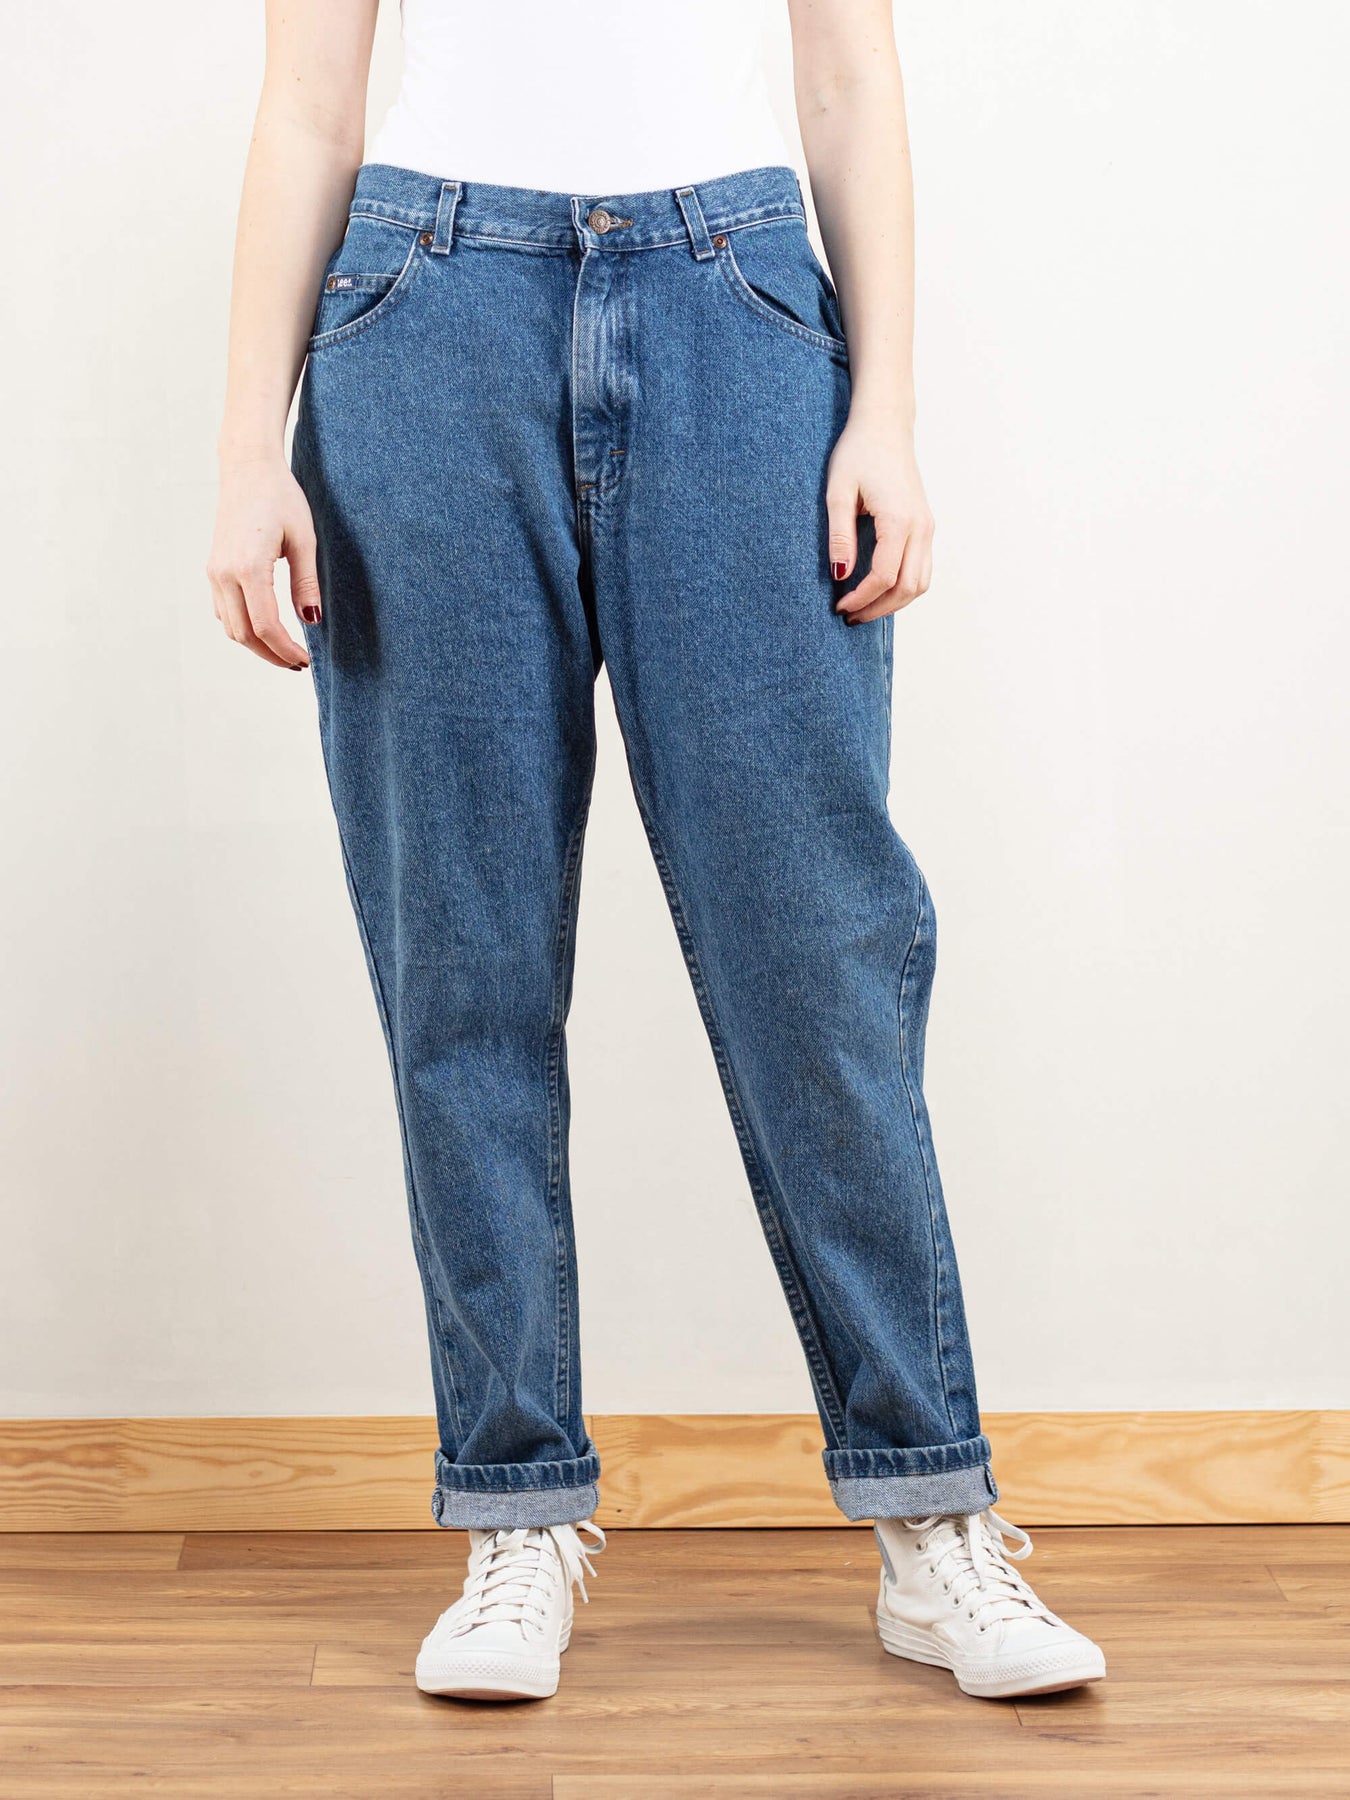 80s 90s LEE Classic High Waist Jeans Size 30 Inch Waist Vintage